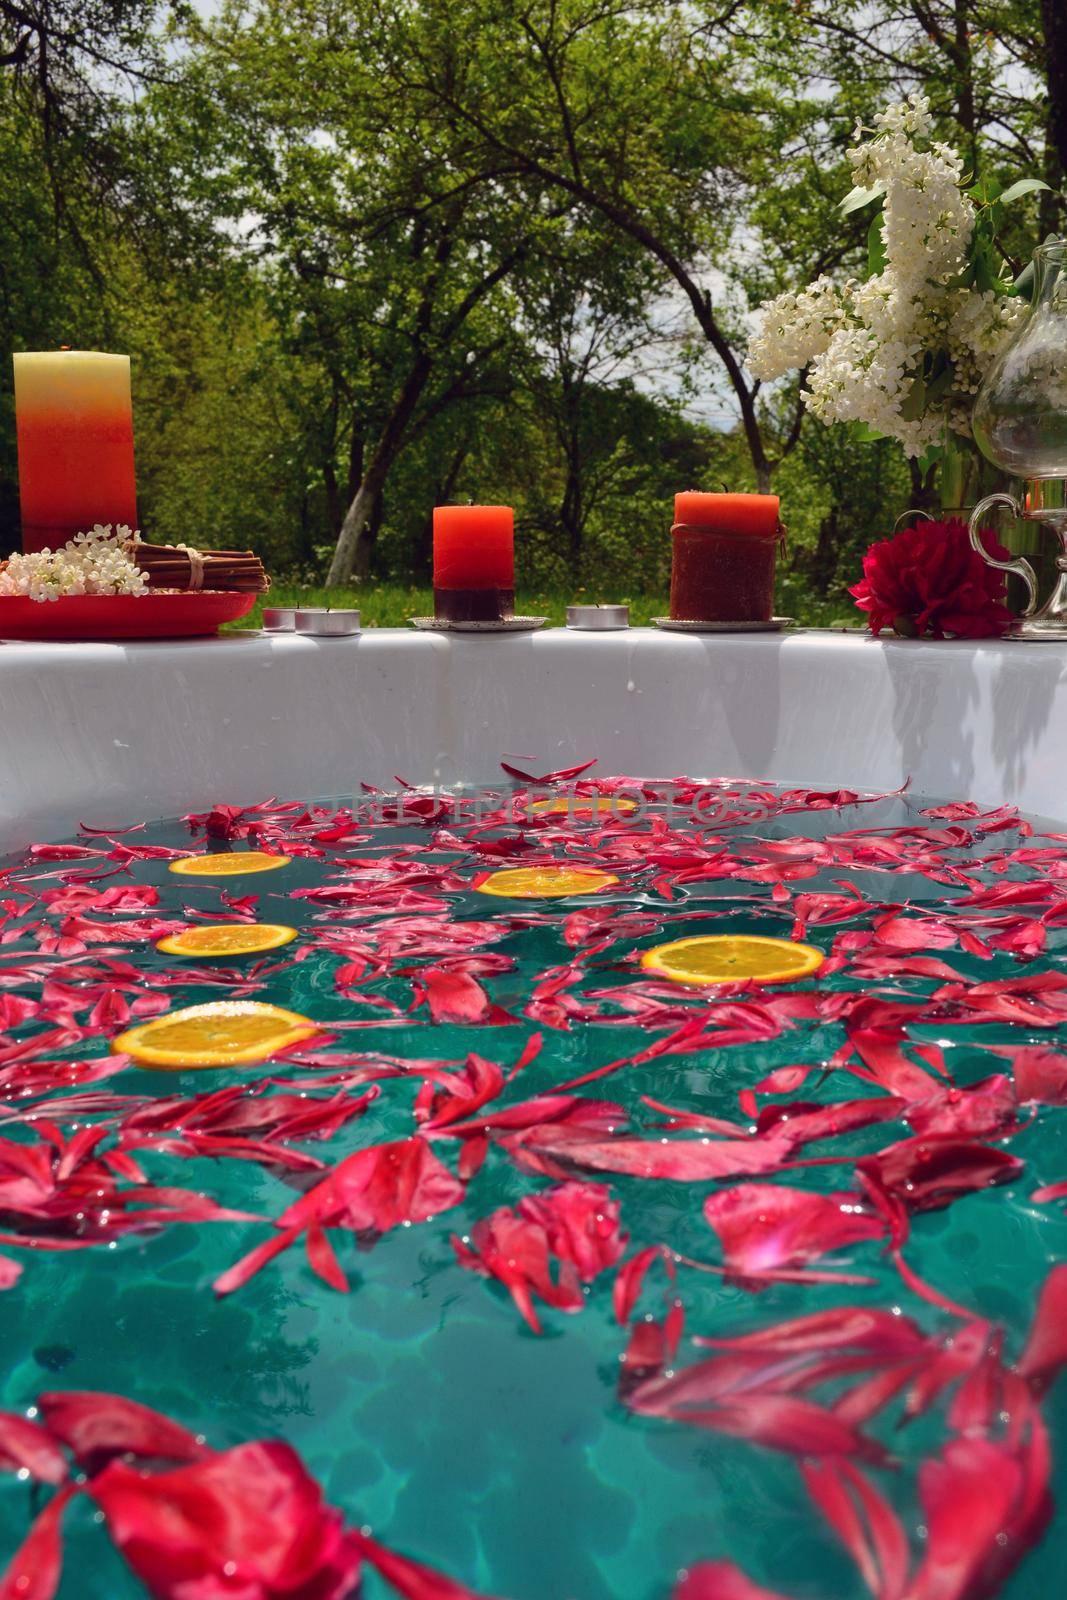 Abstract background with red peony flowers and orange slices in a bathtub outdoor by hibrida13